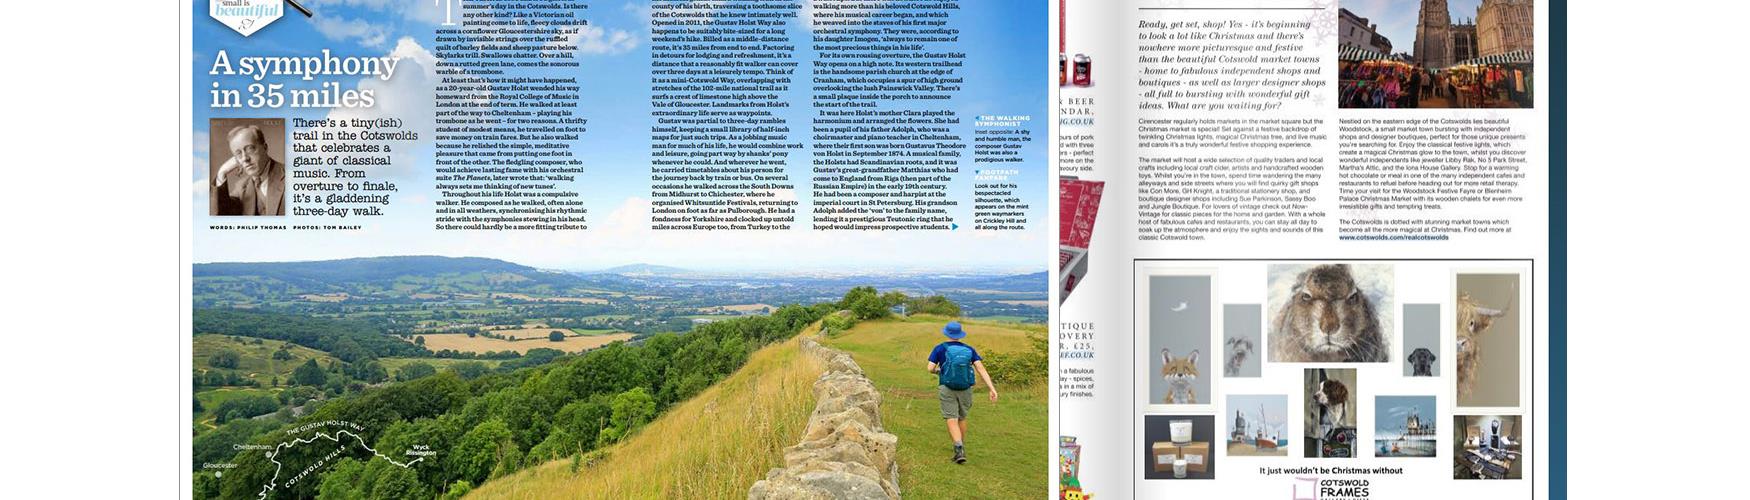 Press articles on the Cotswolds